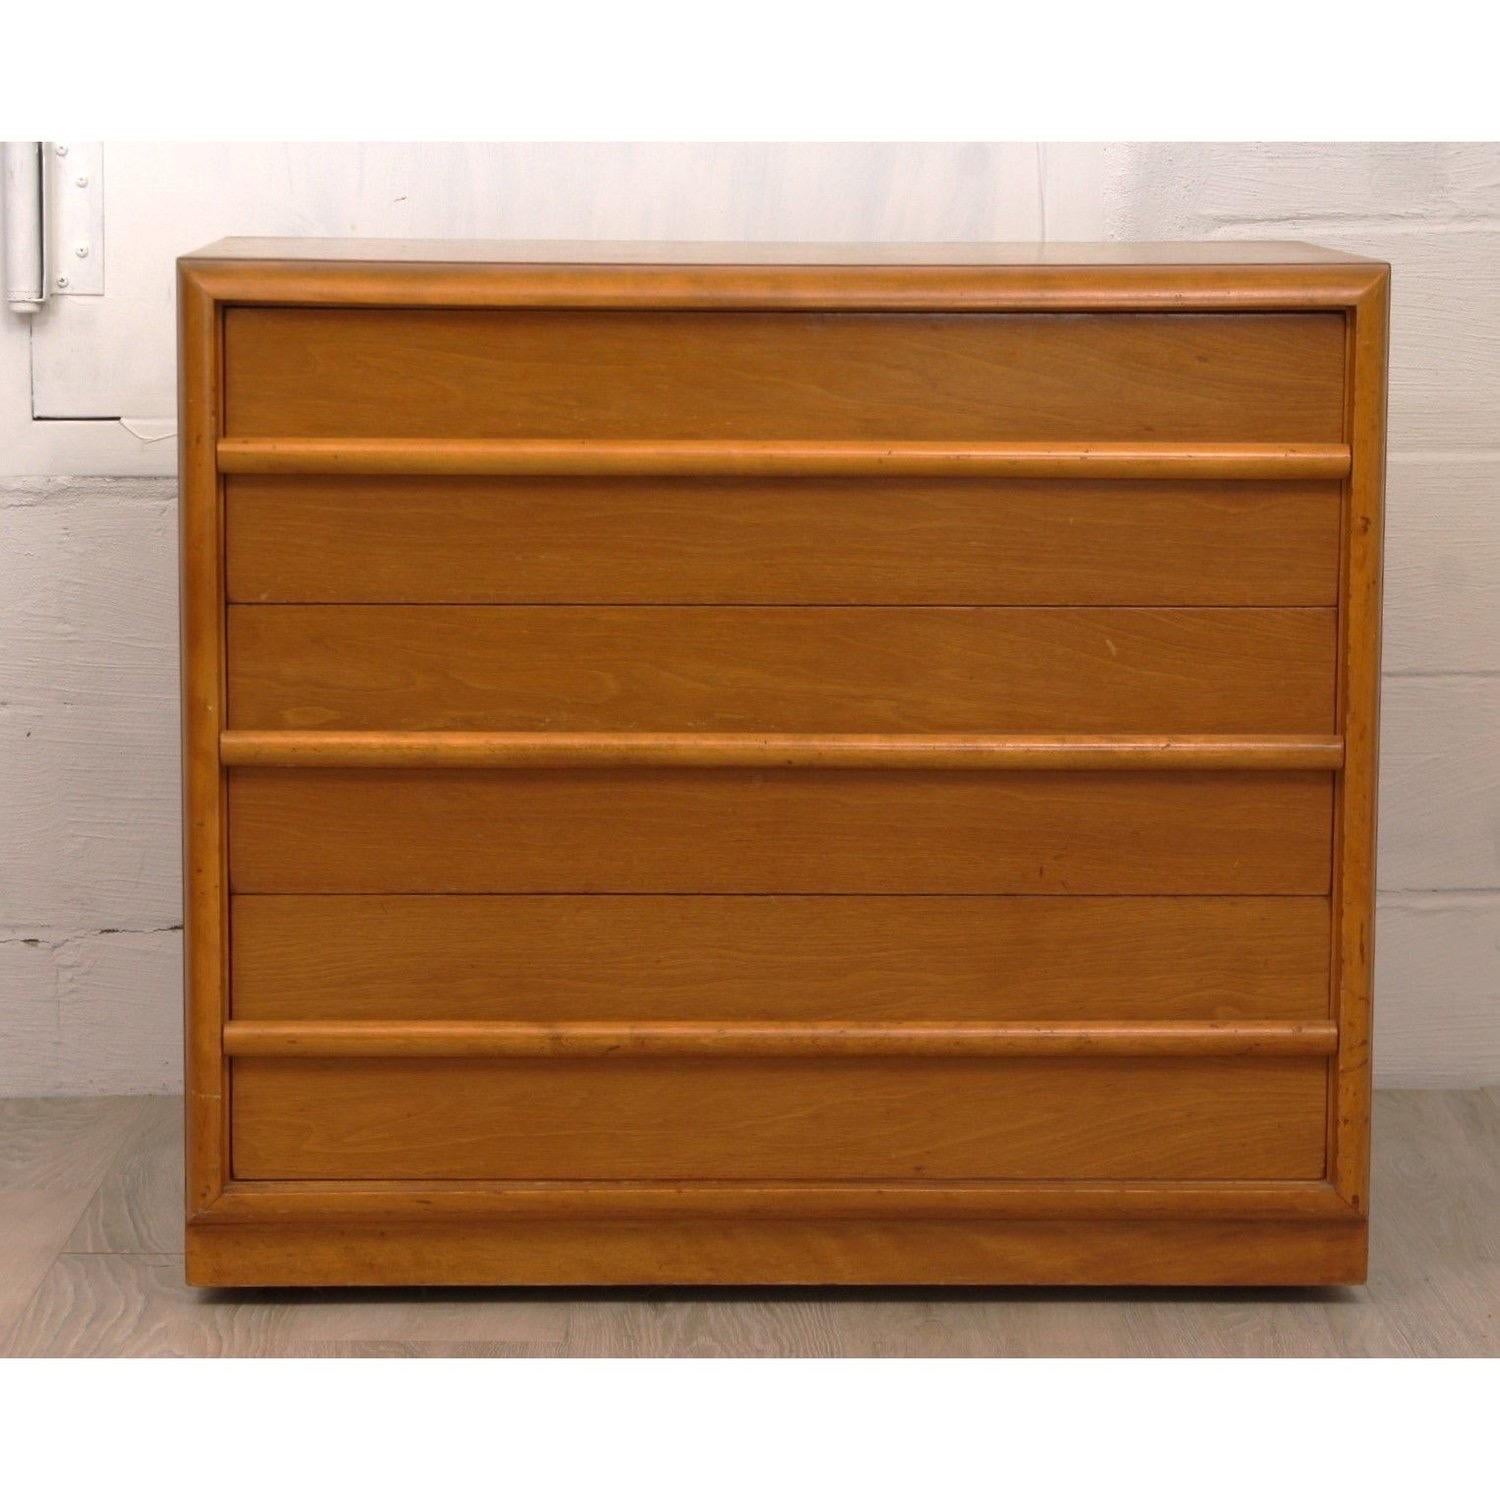 A four drawer dresser by TH Robsjohn Gibbibgs for Widdicomb. 

USA, circa 1940s/50s.

Signed with fabric label.

Dimensions: 31